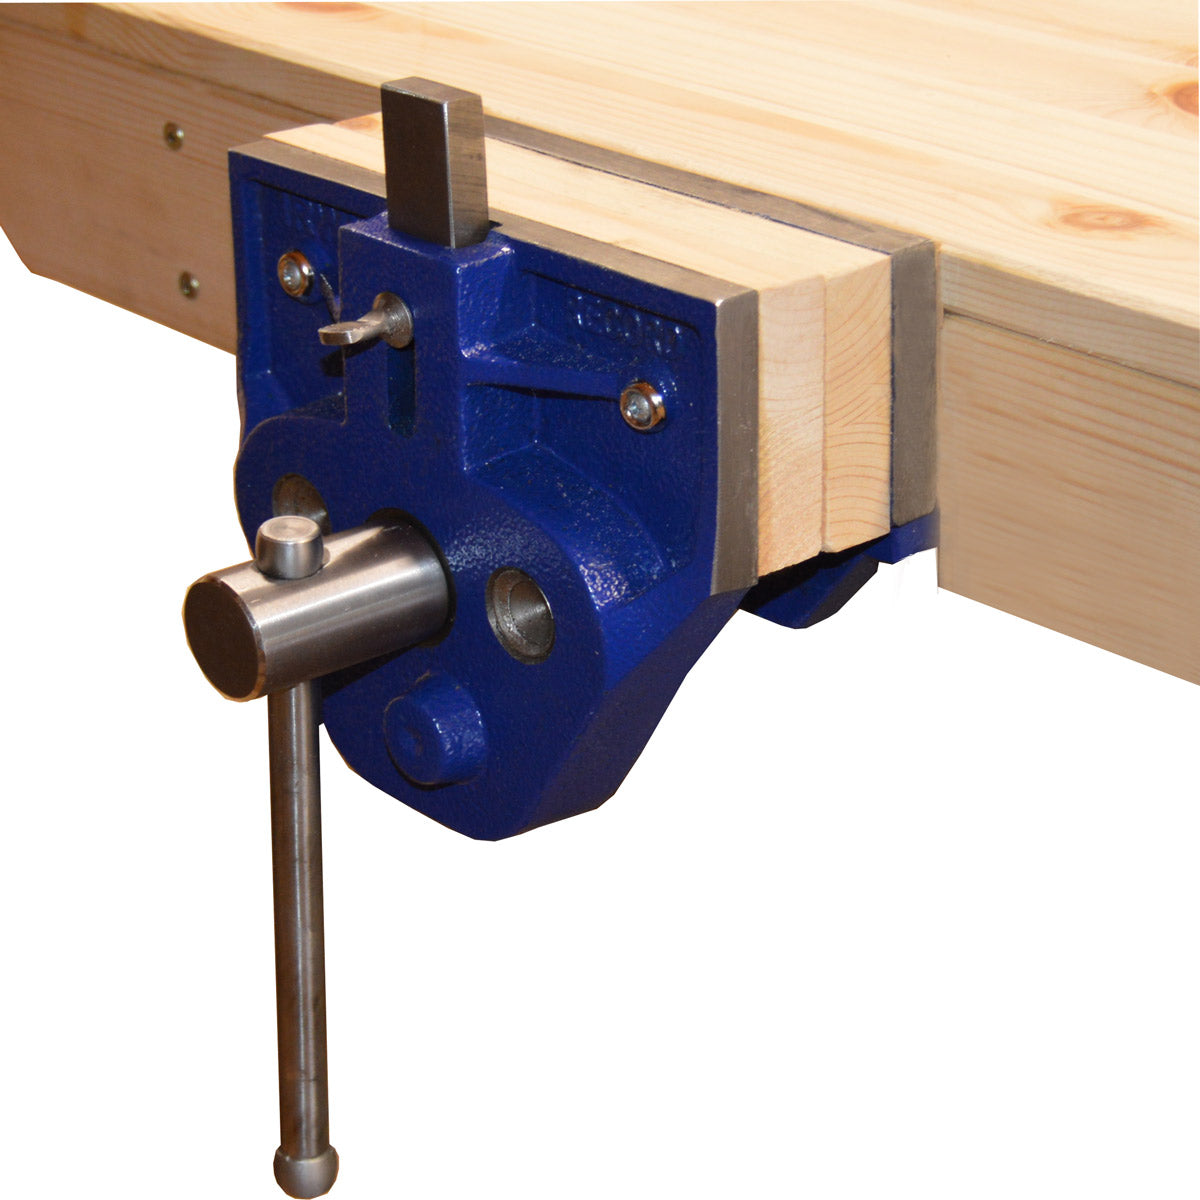 How to use a woodworking vice